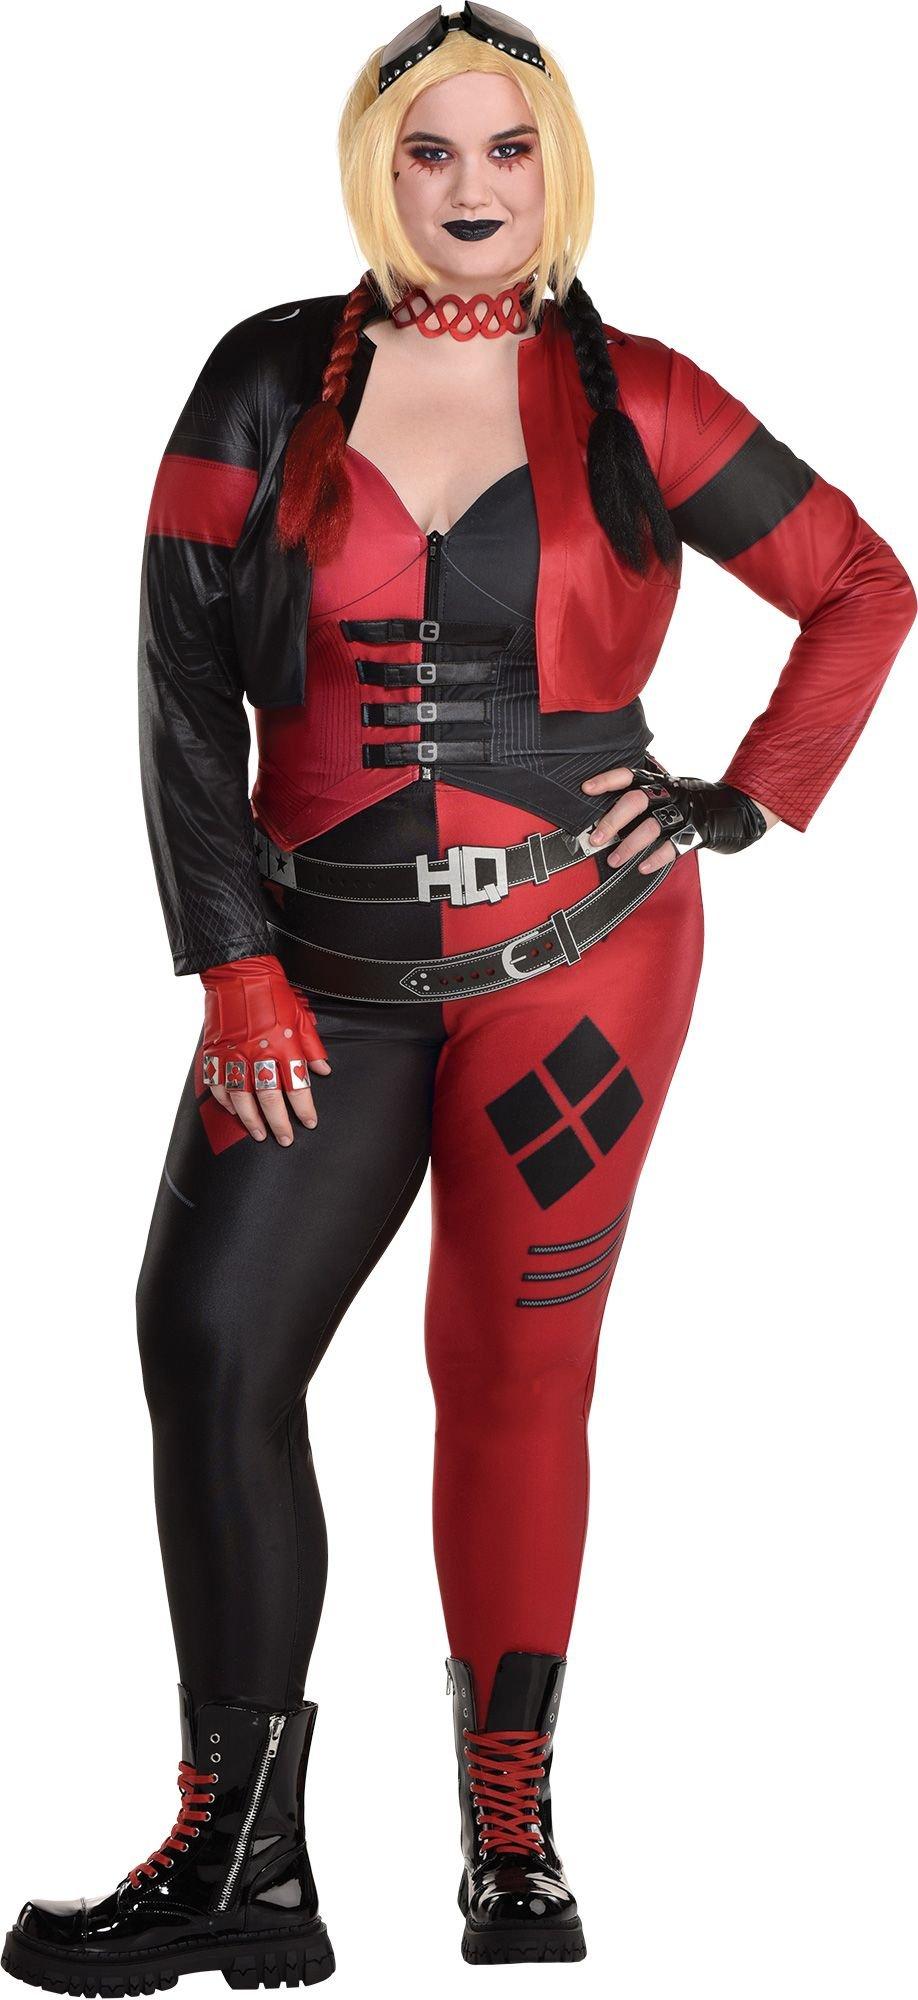 Adult Harley Quinn Plus Size Deluxe Costume - Suicide Squad 2 | Party City